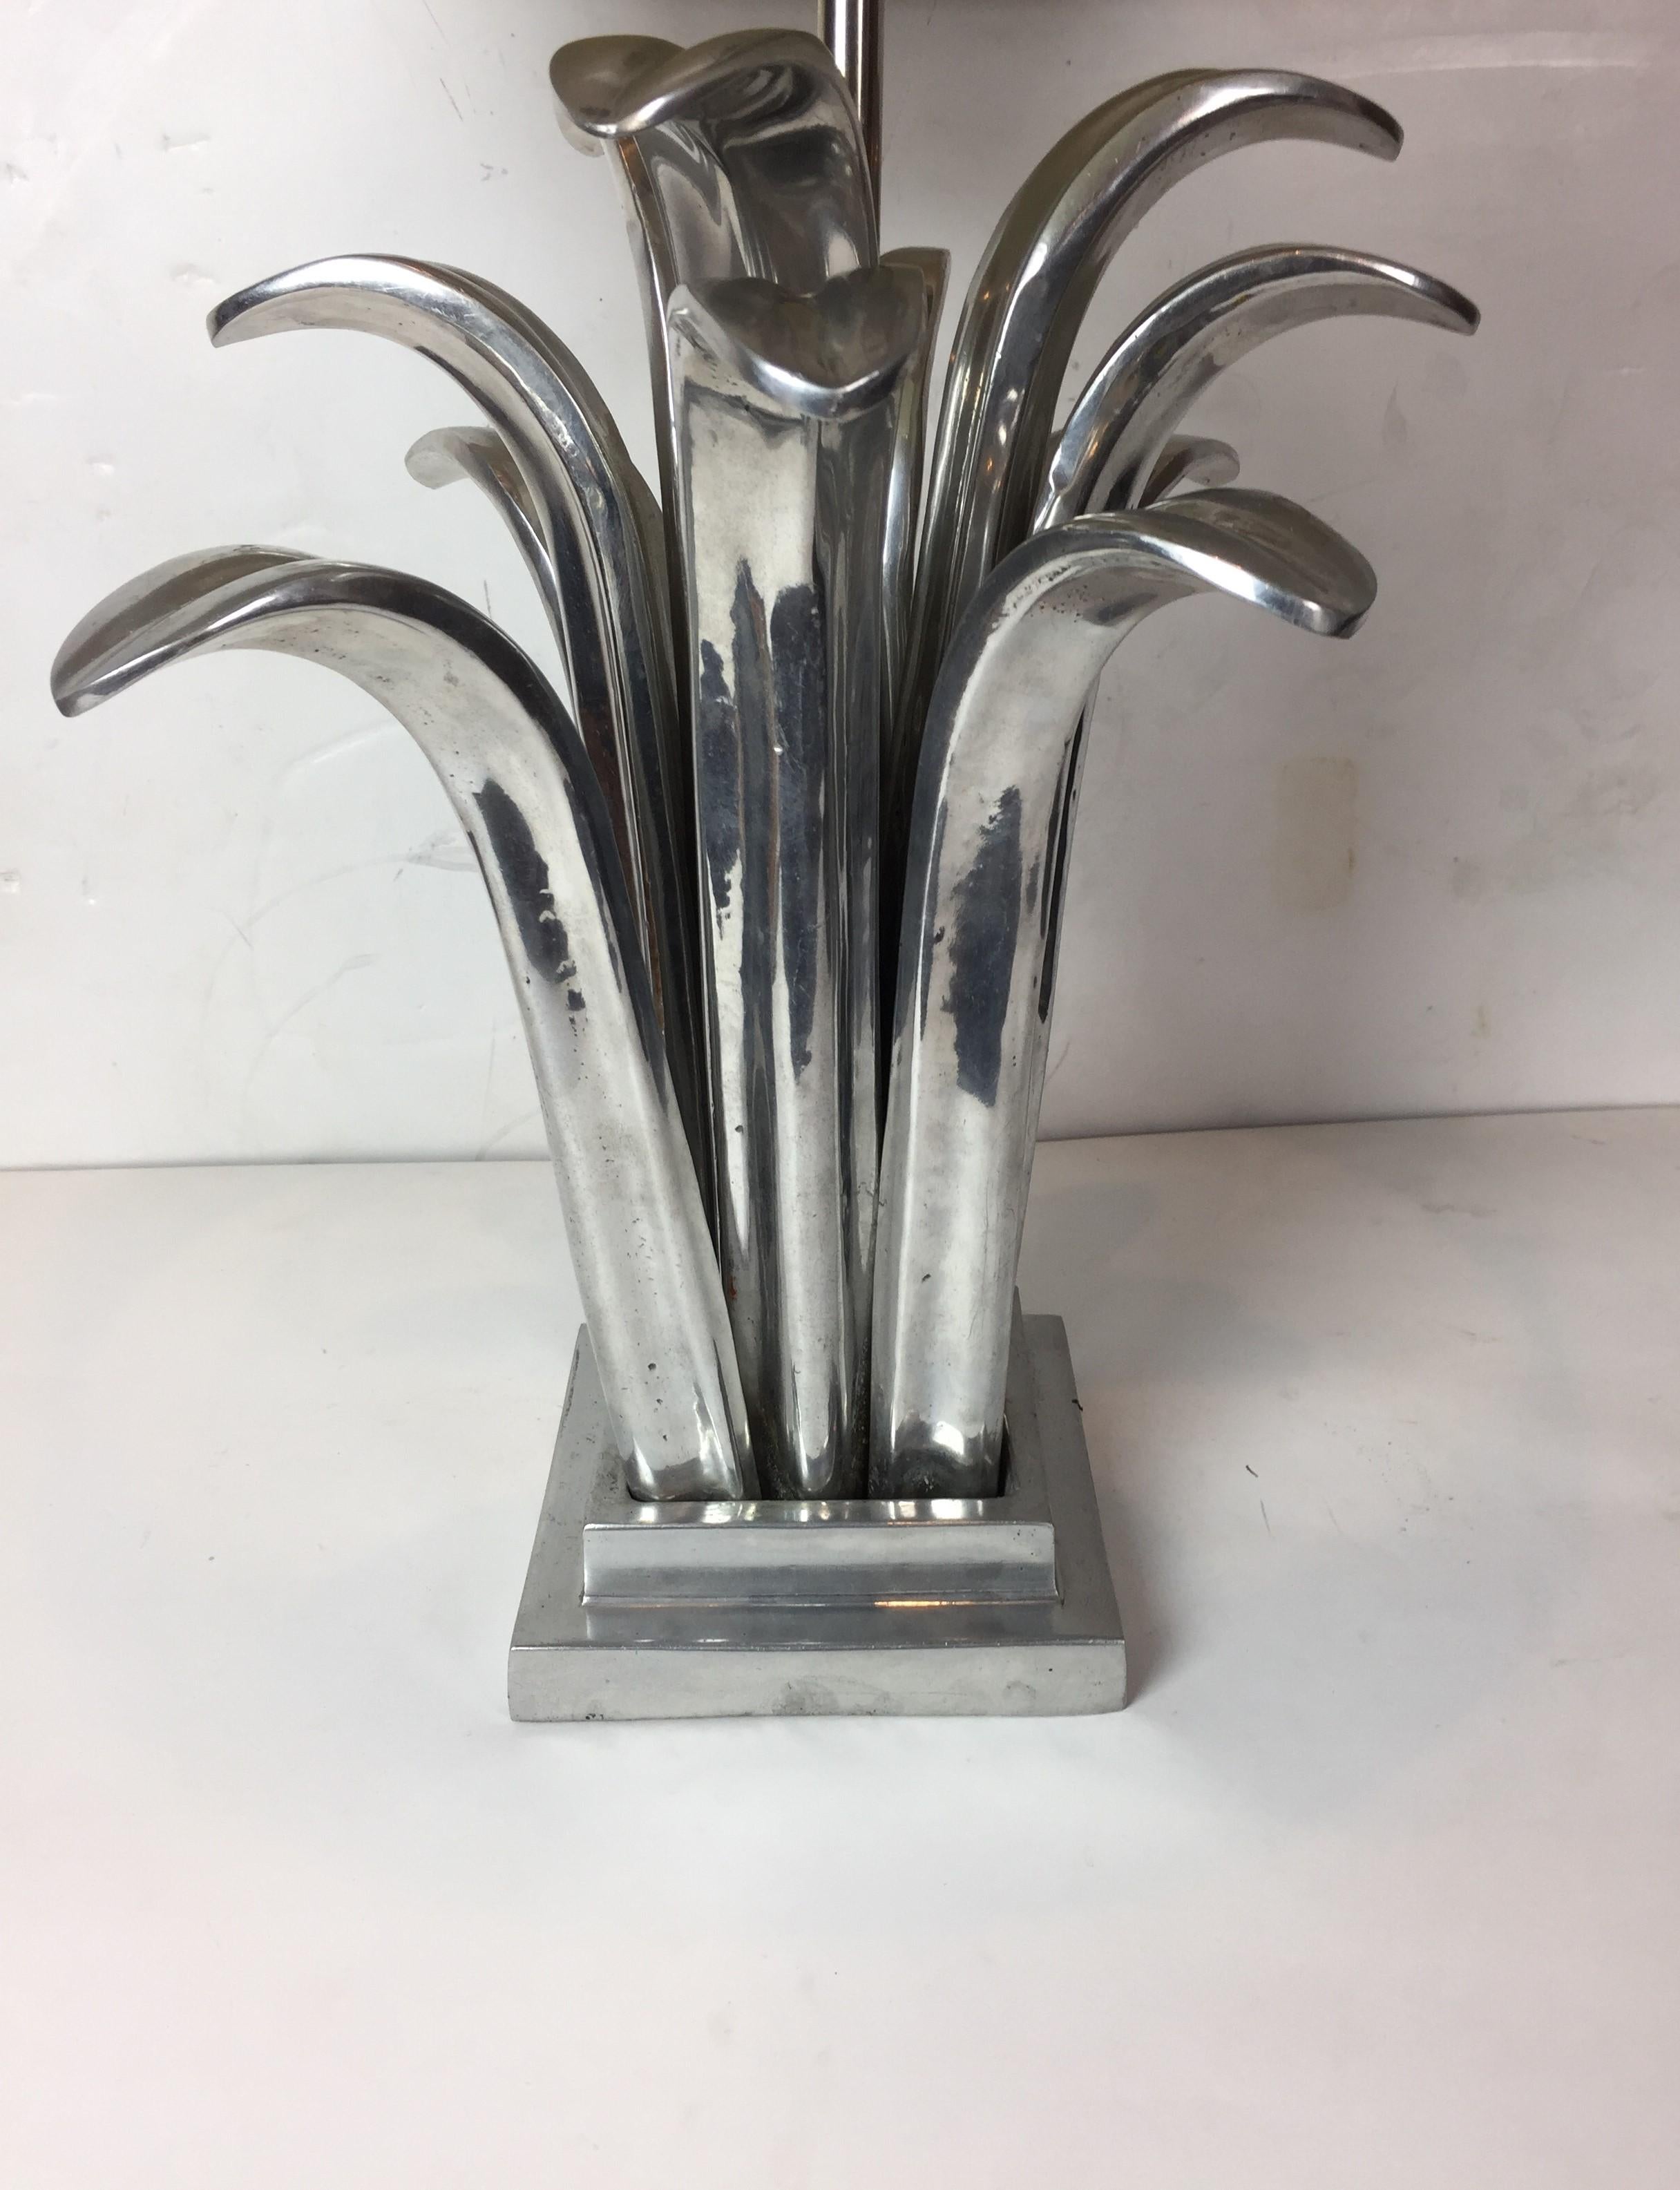 Tropical-style pewter table lamp. The lamp is 25